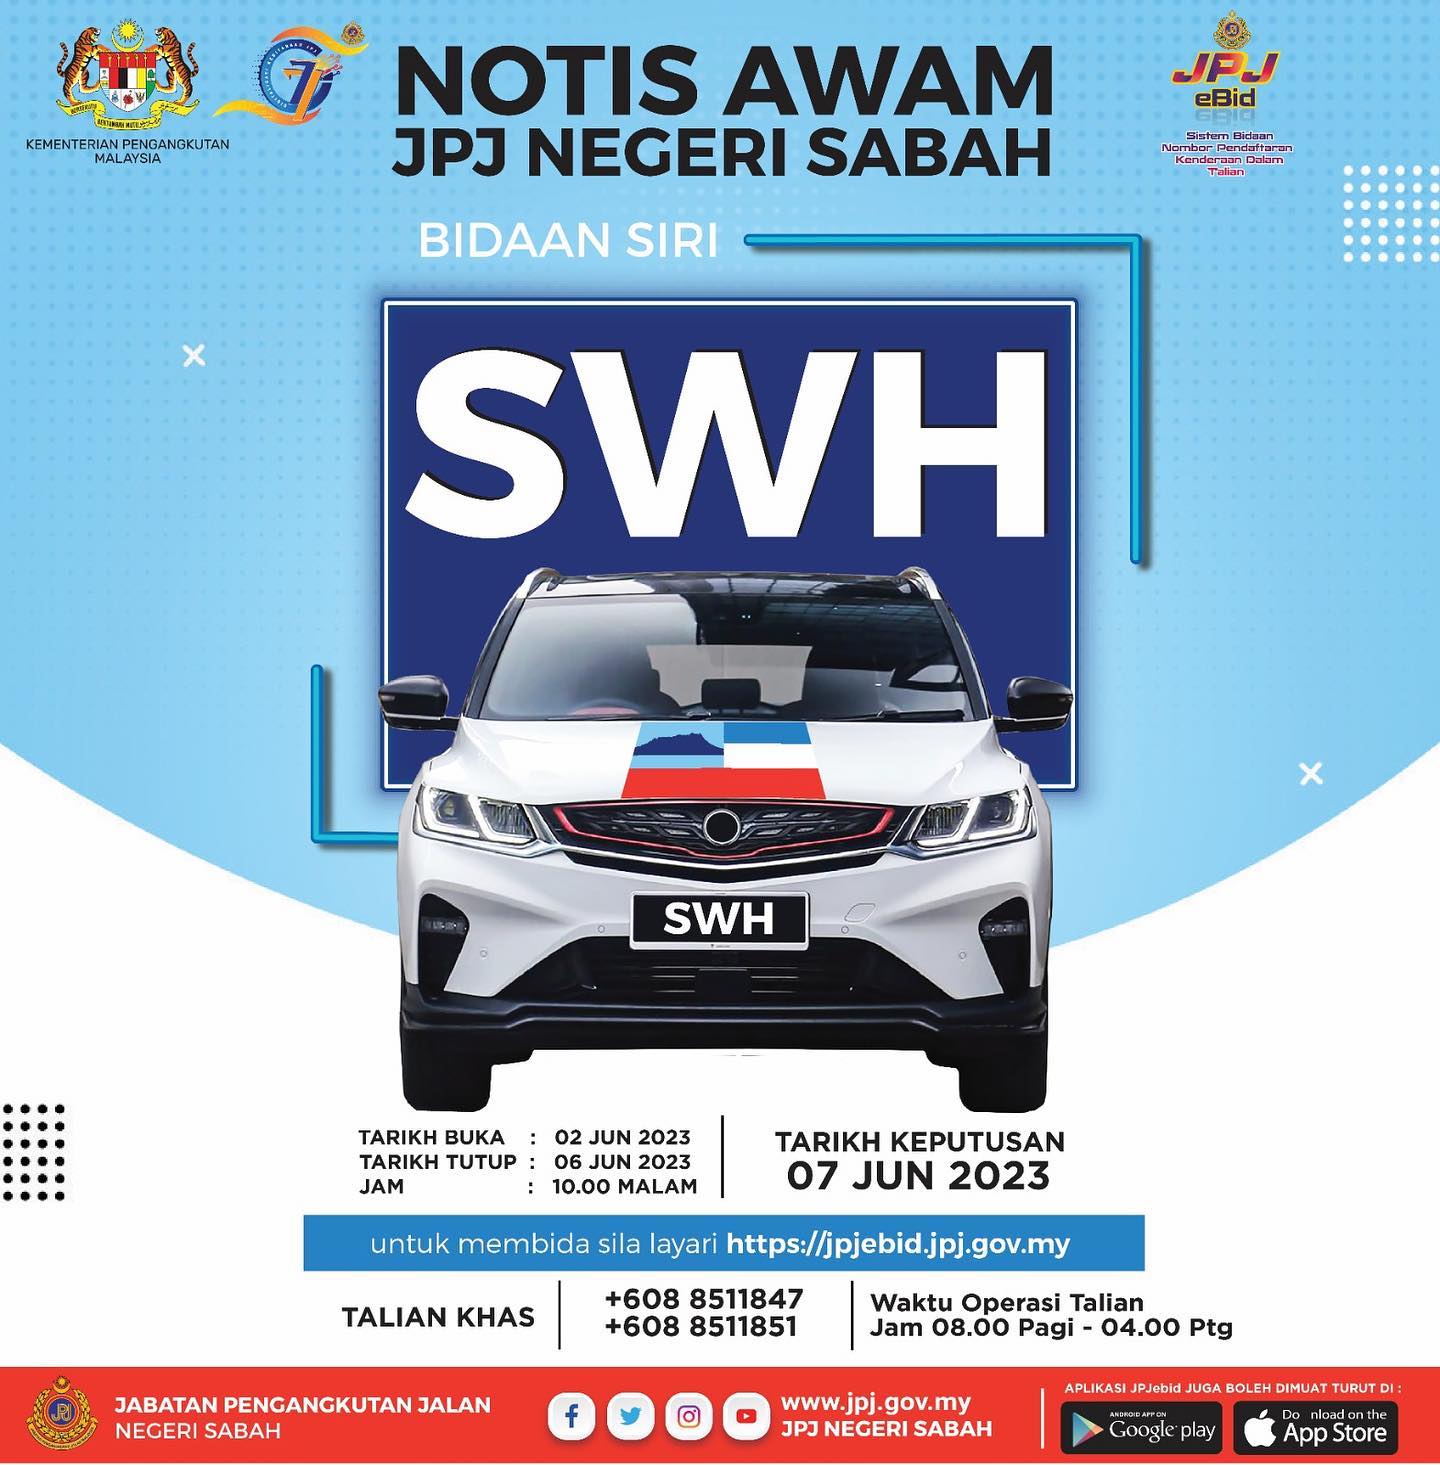 SWH No JPJ license plate